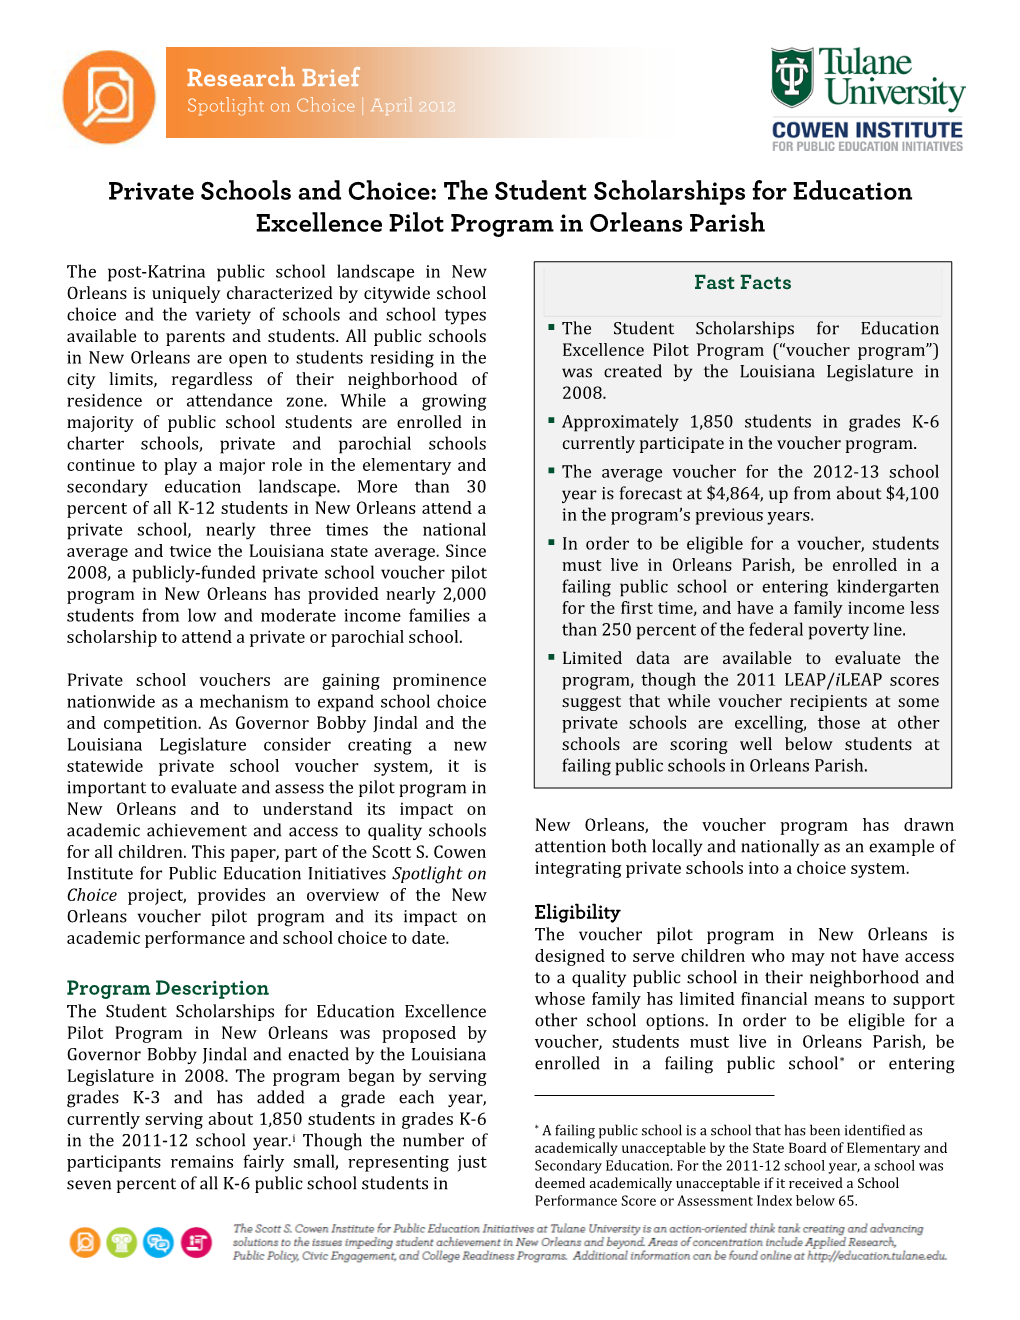 Research Brief Private Schools and Choice: the Student Scholarships